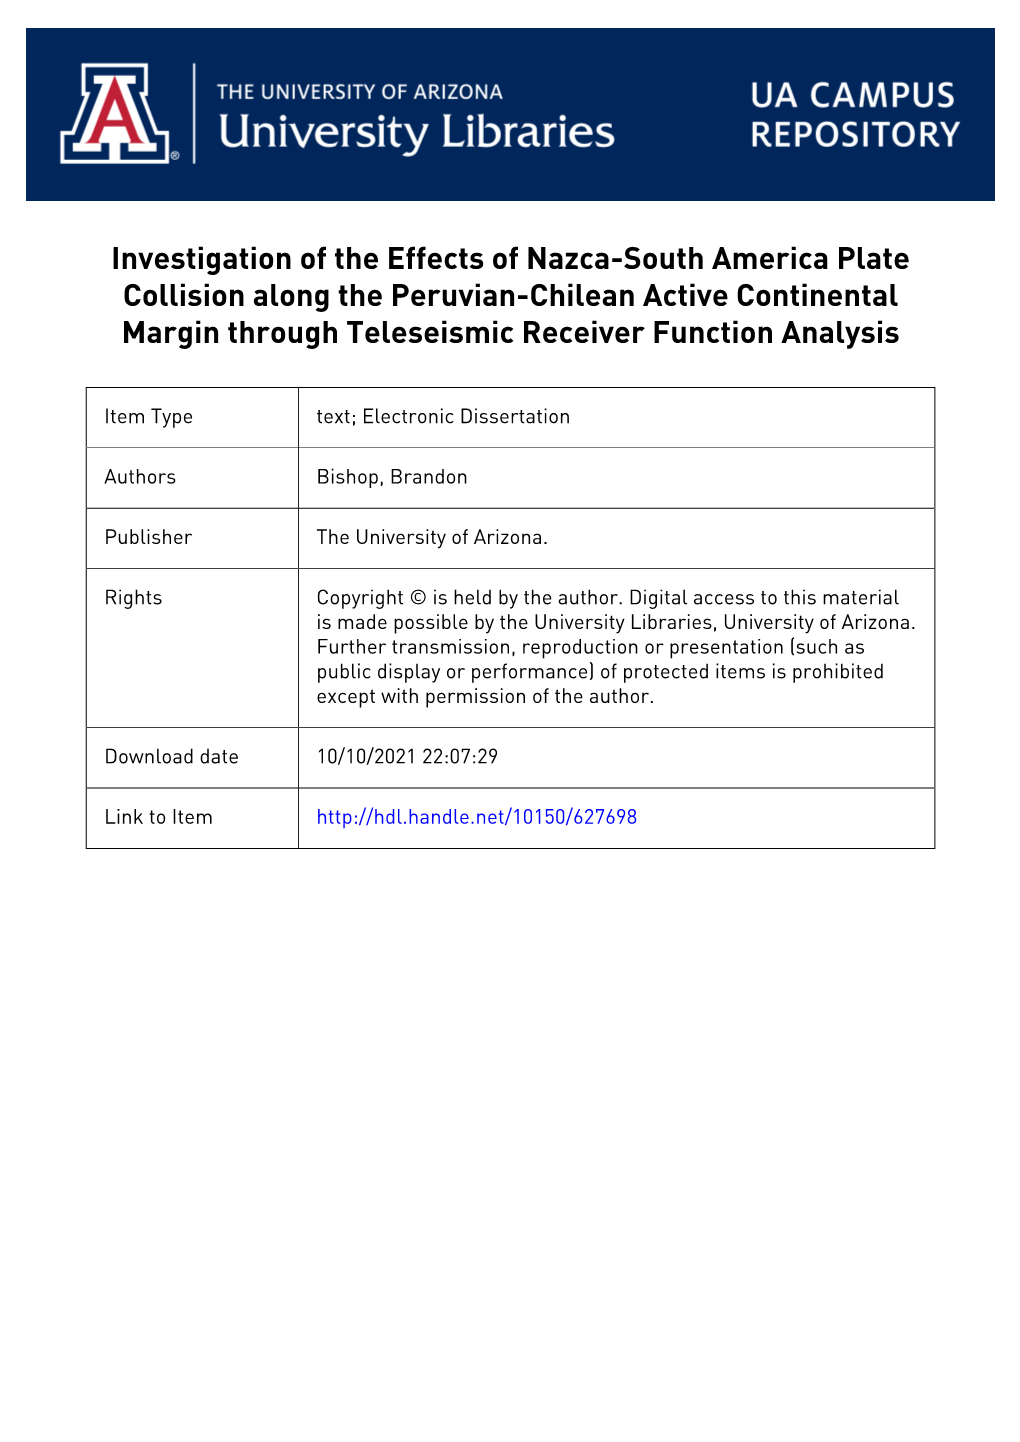 Investigation of the Effects of Nazca-South America